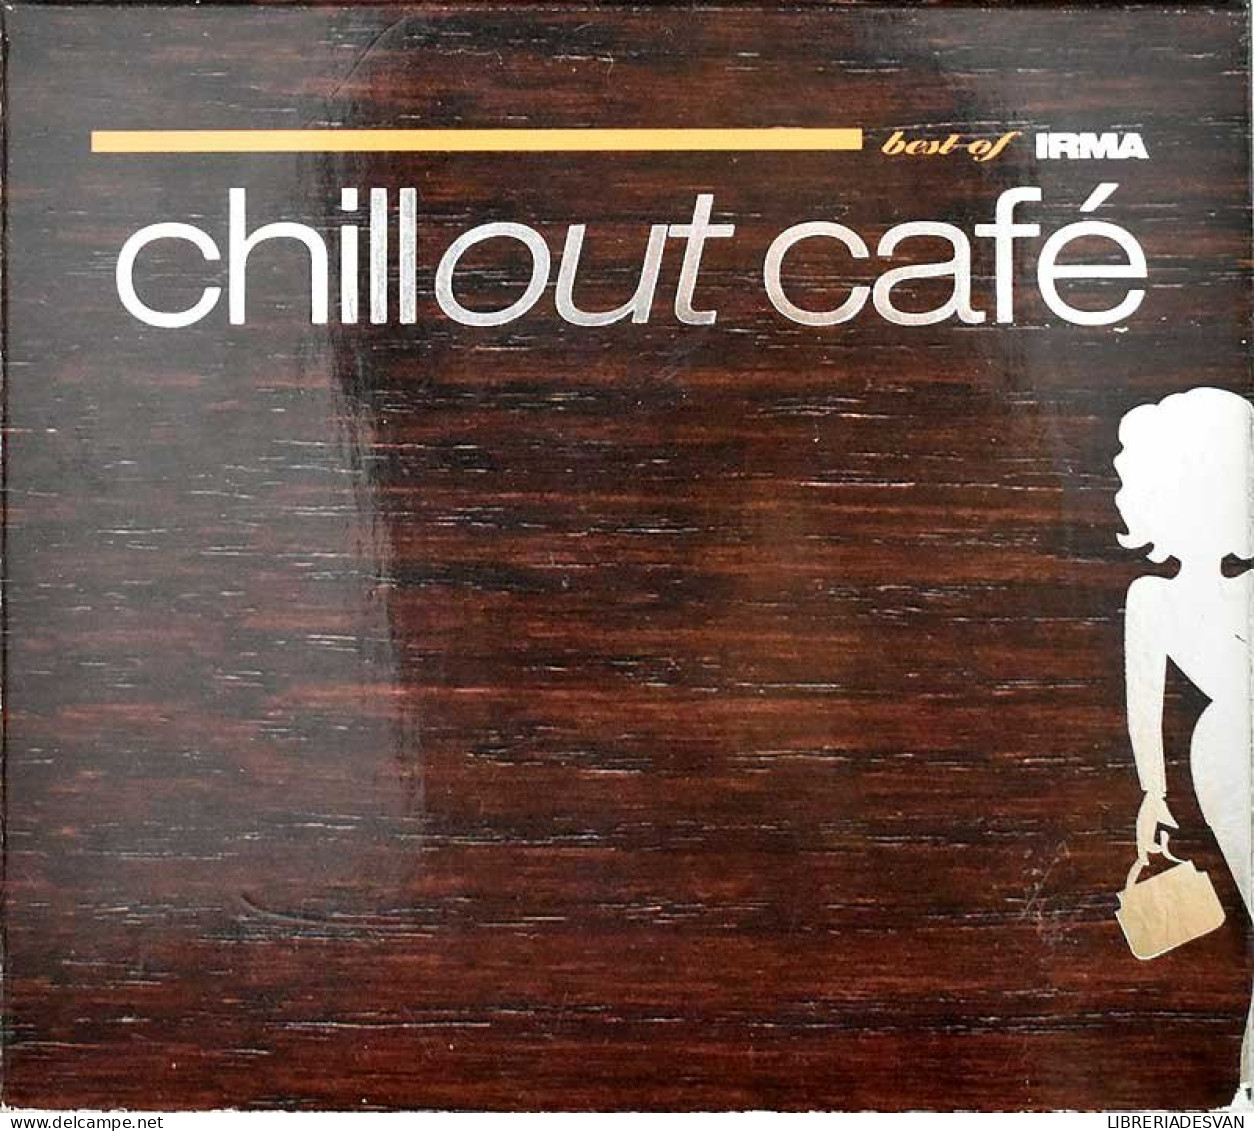 Best Of Irma Chill Out Café. 2 X CD - Nueva Era (New Age)